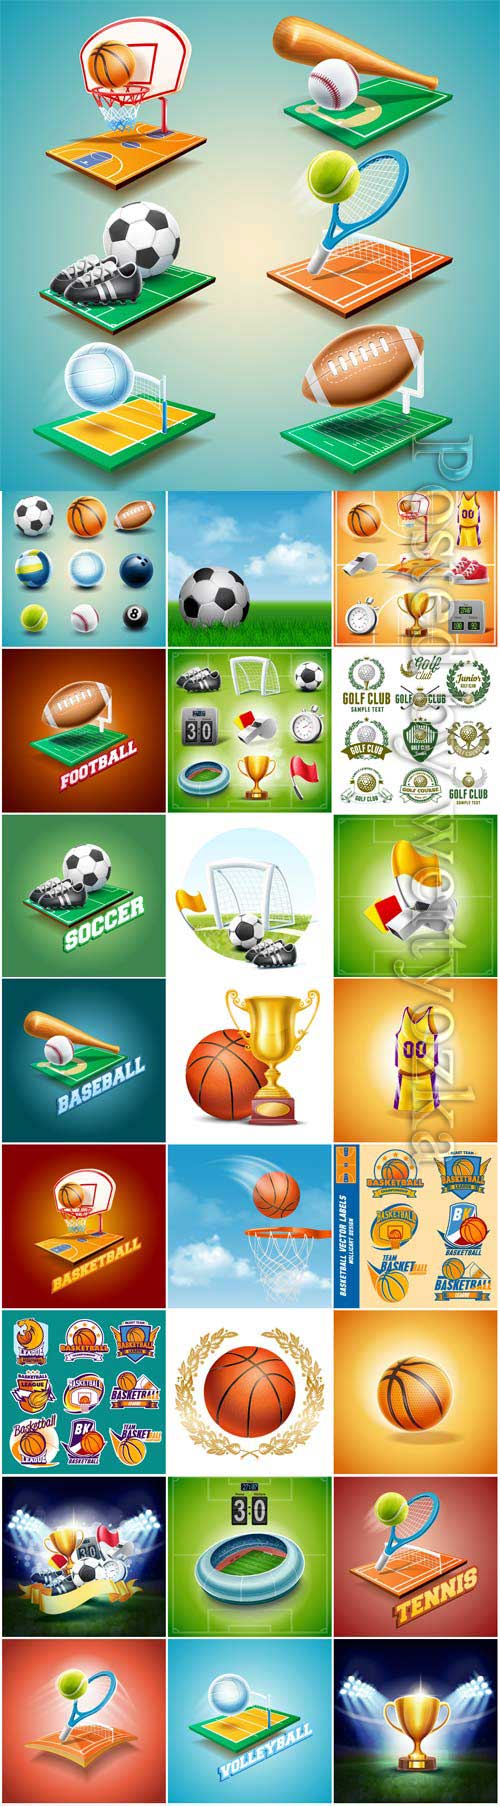 Sports items, balls and awards in vector